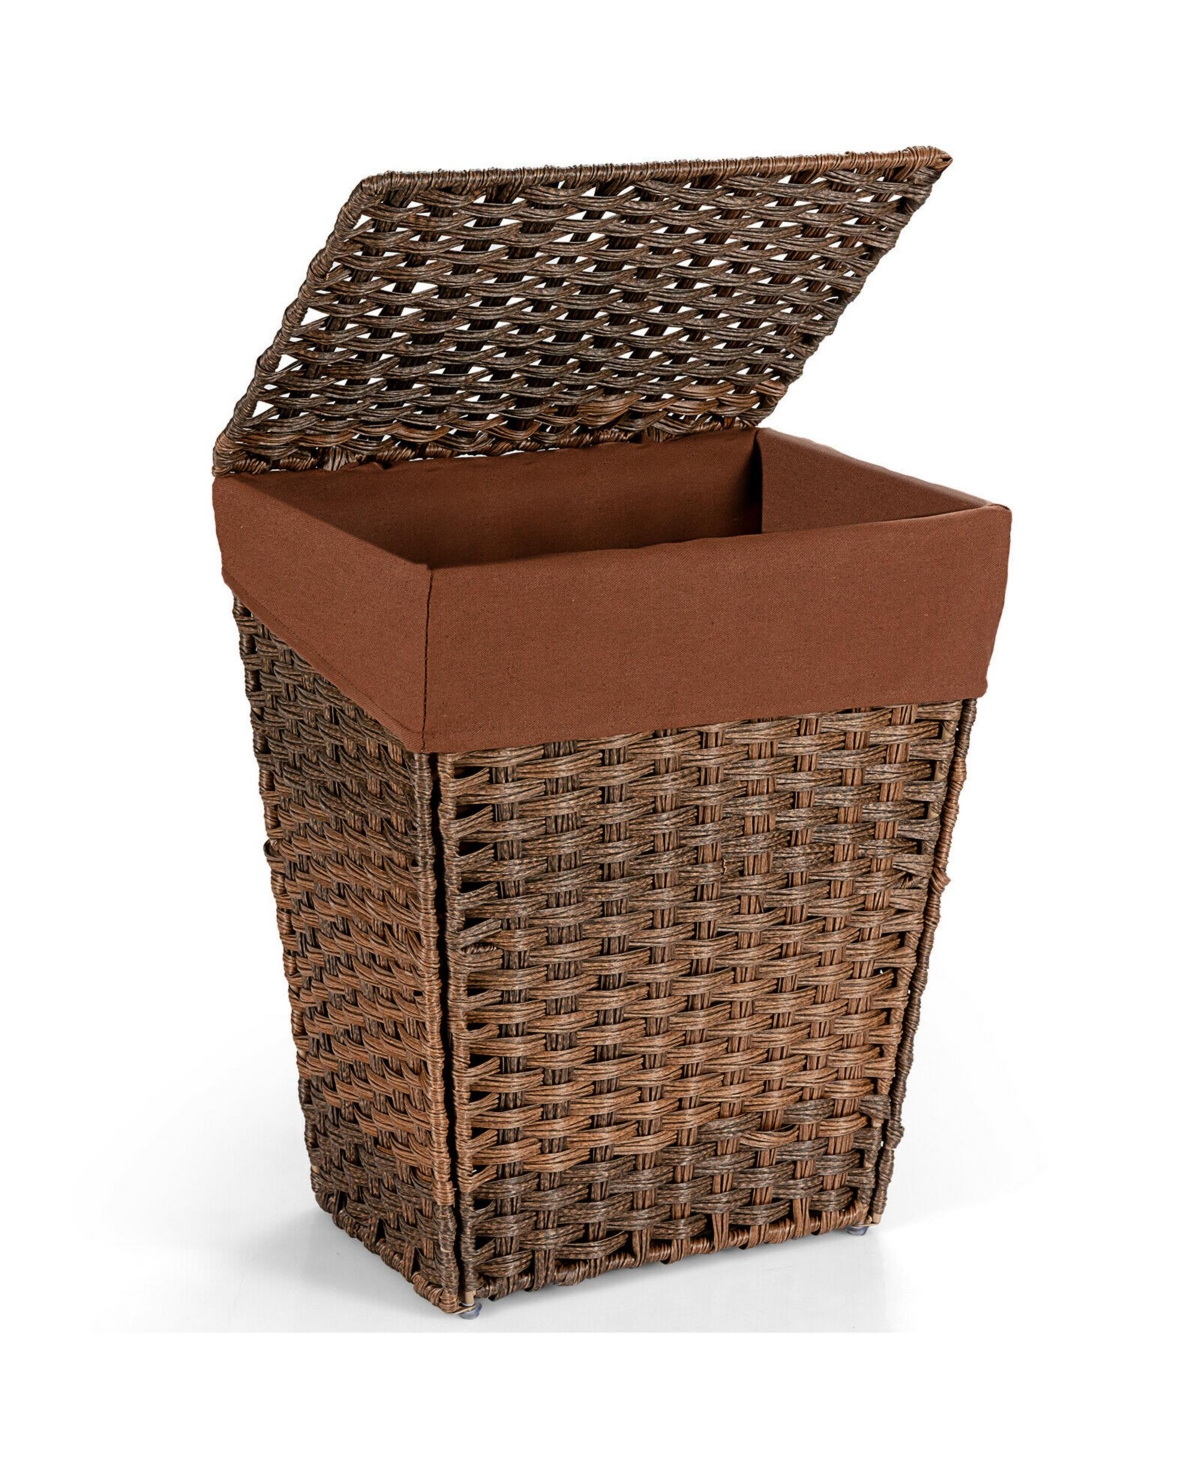 Handwoven Laundry Hamper Foldable w/Removable Liner, Lid & Handles - Brown